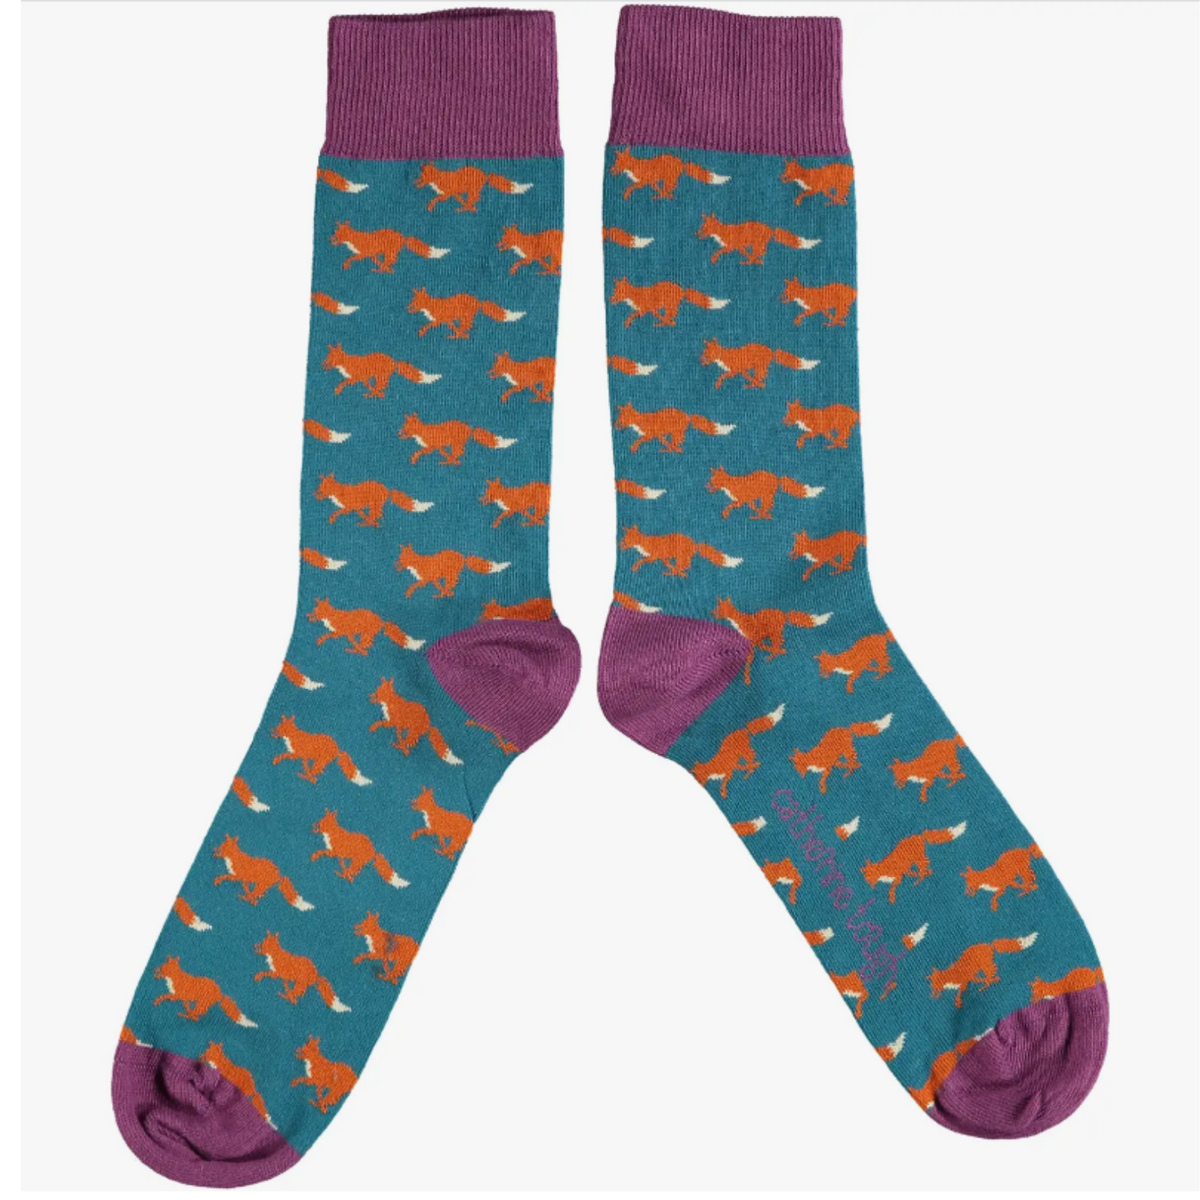 Catherine Tough men&#39;s fox socks design features red foxes on a teal base framed with purple cuffs, heels &amp; toes.